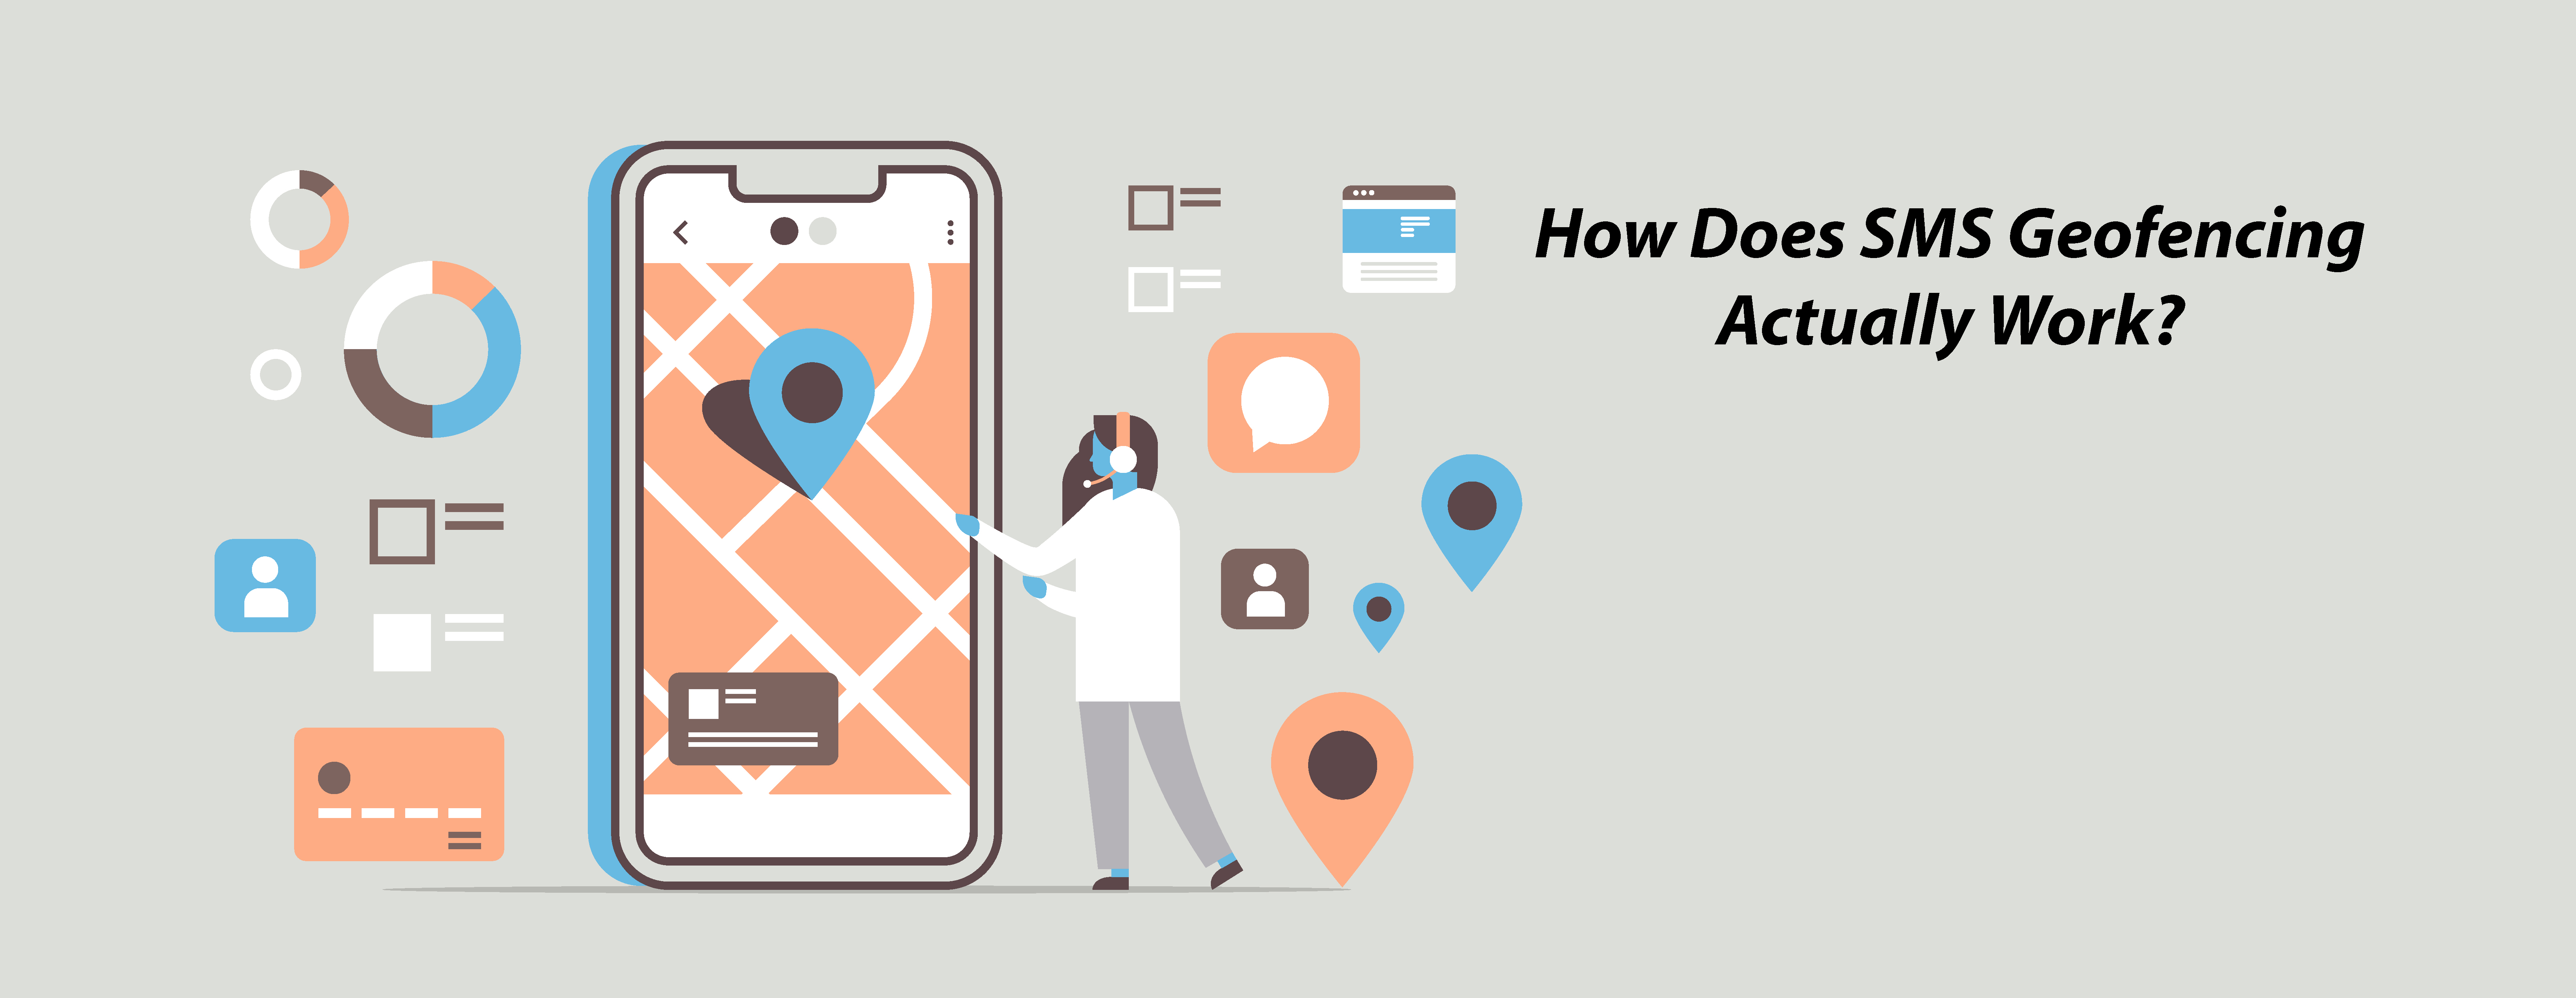 How Does SMS Geofencing Actually Work?